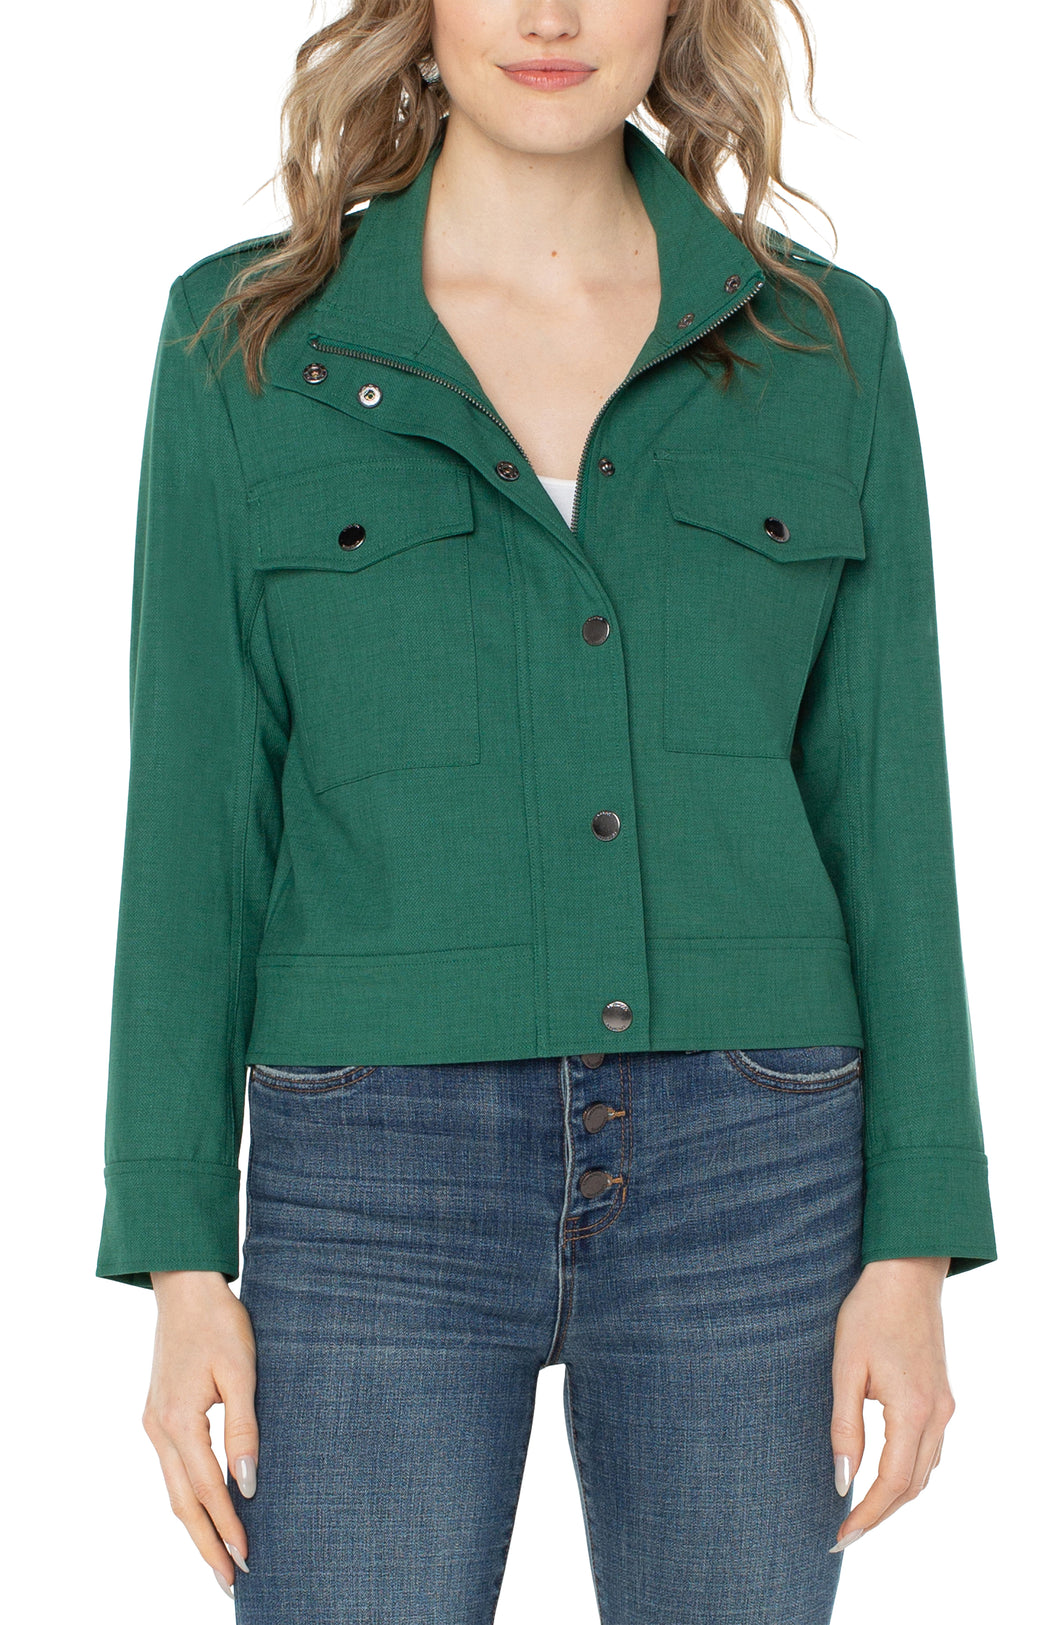 Liverpool Los Angeles' Utility Crop Jacket offers minimalism with on-trend appeal. Crafted from a soft and stretchy twill fabric, this piece provides an optimal blend of feminine charm and edgy appeal for versatile styling.  Color - Serpentine; Bright green. Collared. Double front patch pockets. Button and zip front closure. Snap closure at wrists. Cropped style. Fabric - 47% Polyester. 44%Viscose. 6%Elastane. 3% Other Fiber.